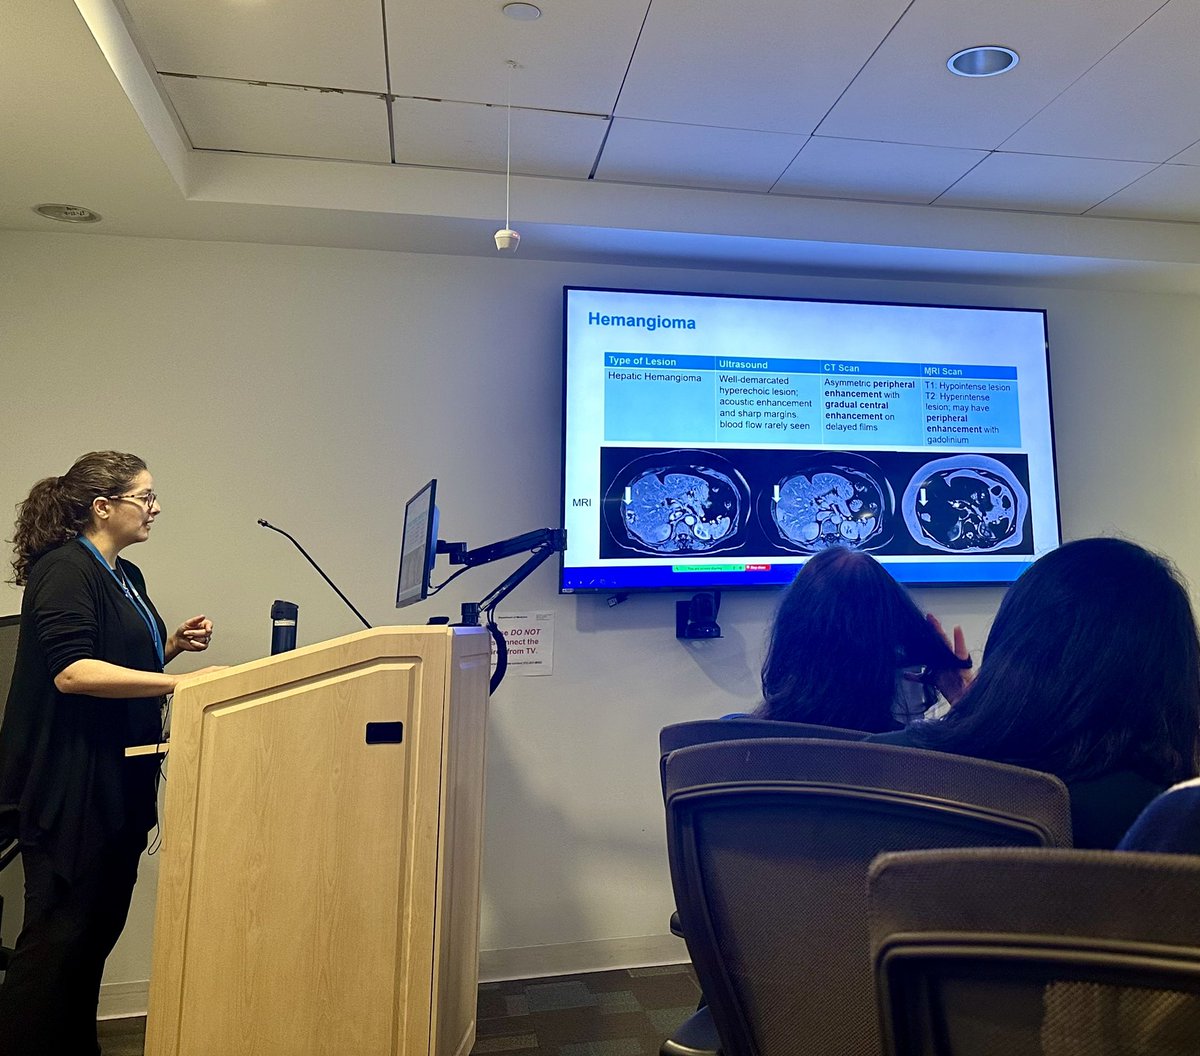 3rd @MountSinaiGI Academic Half-Day in the books! Our immersive session covered all things liver masses: @AASLDtweets guidelines on HCC, benign liver lesions by @LaurenTGrinspan, HCC tx by Dr. P Tabrizian, and liver txp for HCC by @sm_rutledge @MountSinaiLiver @BhavanaBRaoMD